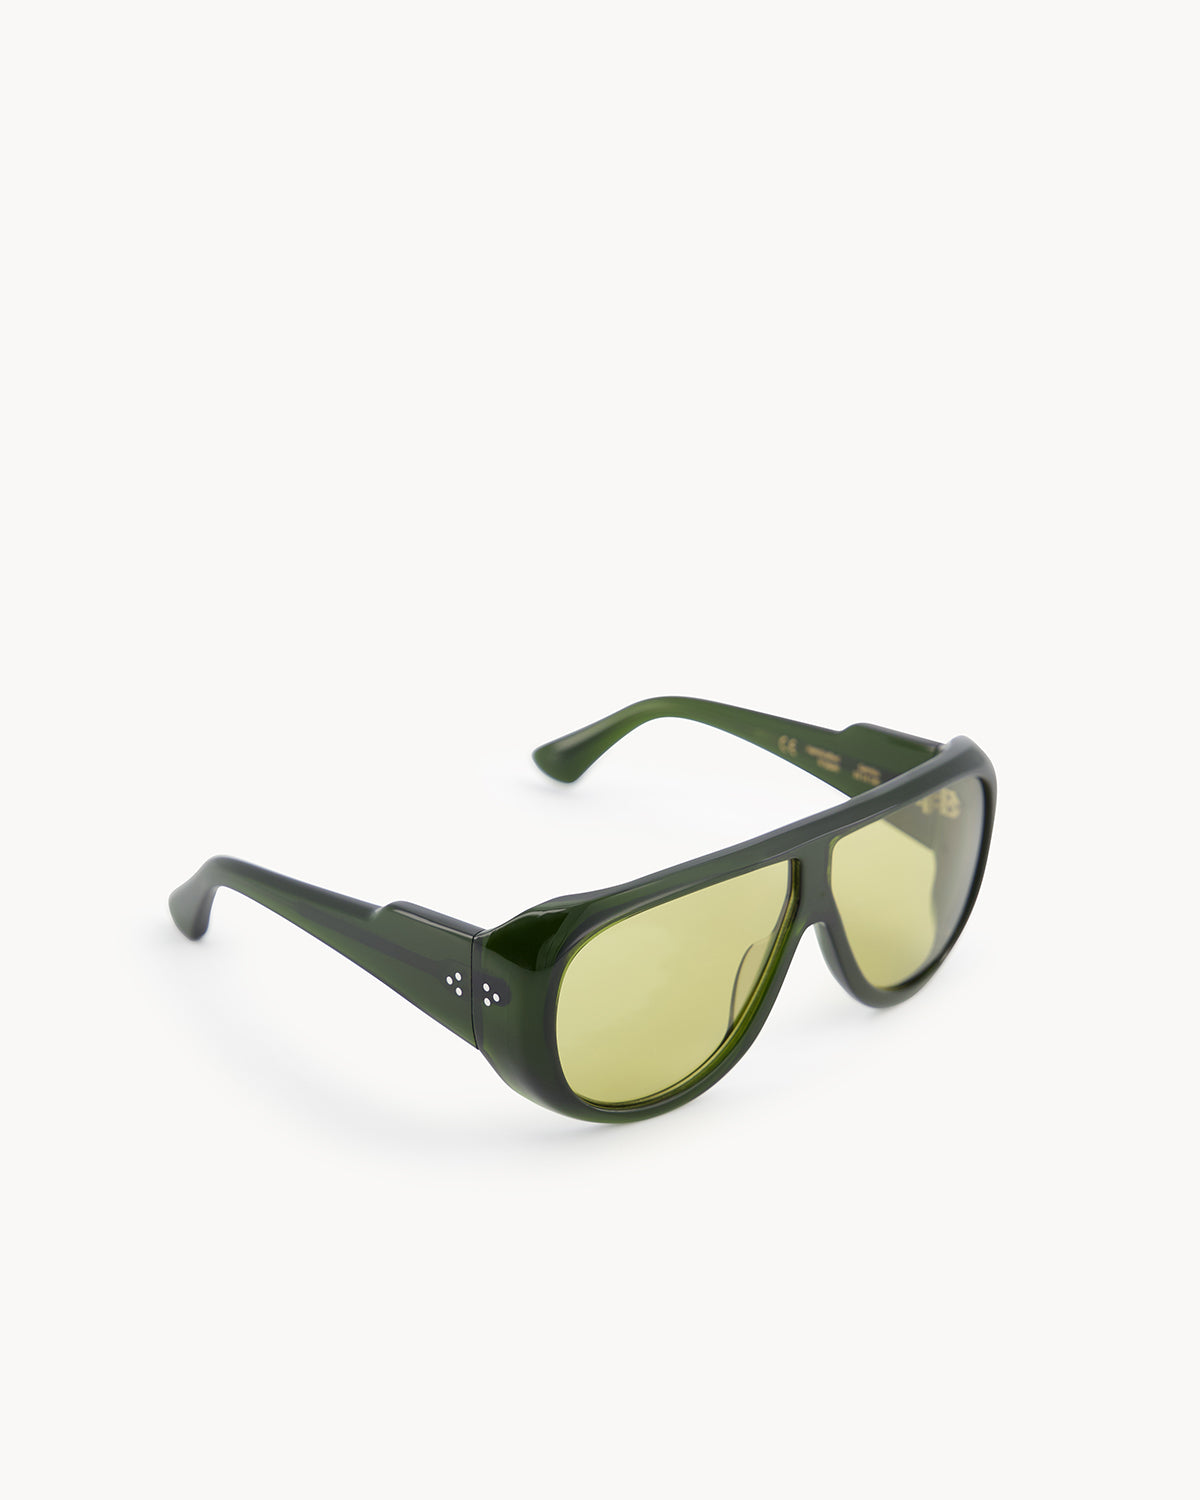 Port Tanger Gambia Sunglasses in Cardamom Acetate and Warm Olive Lenses 2